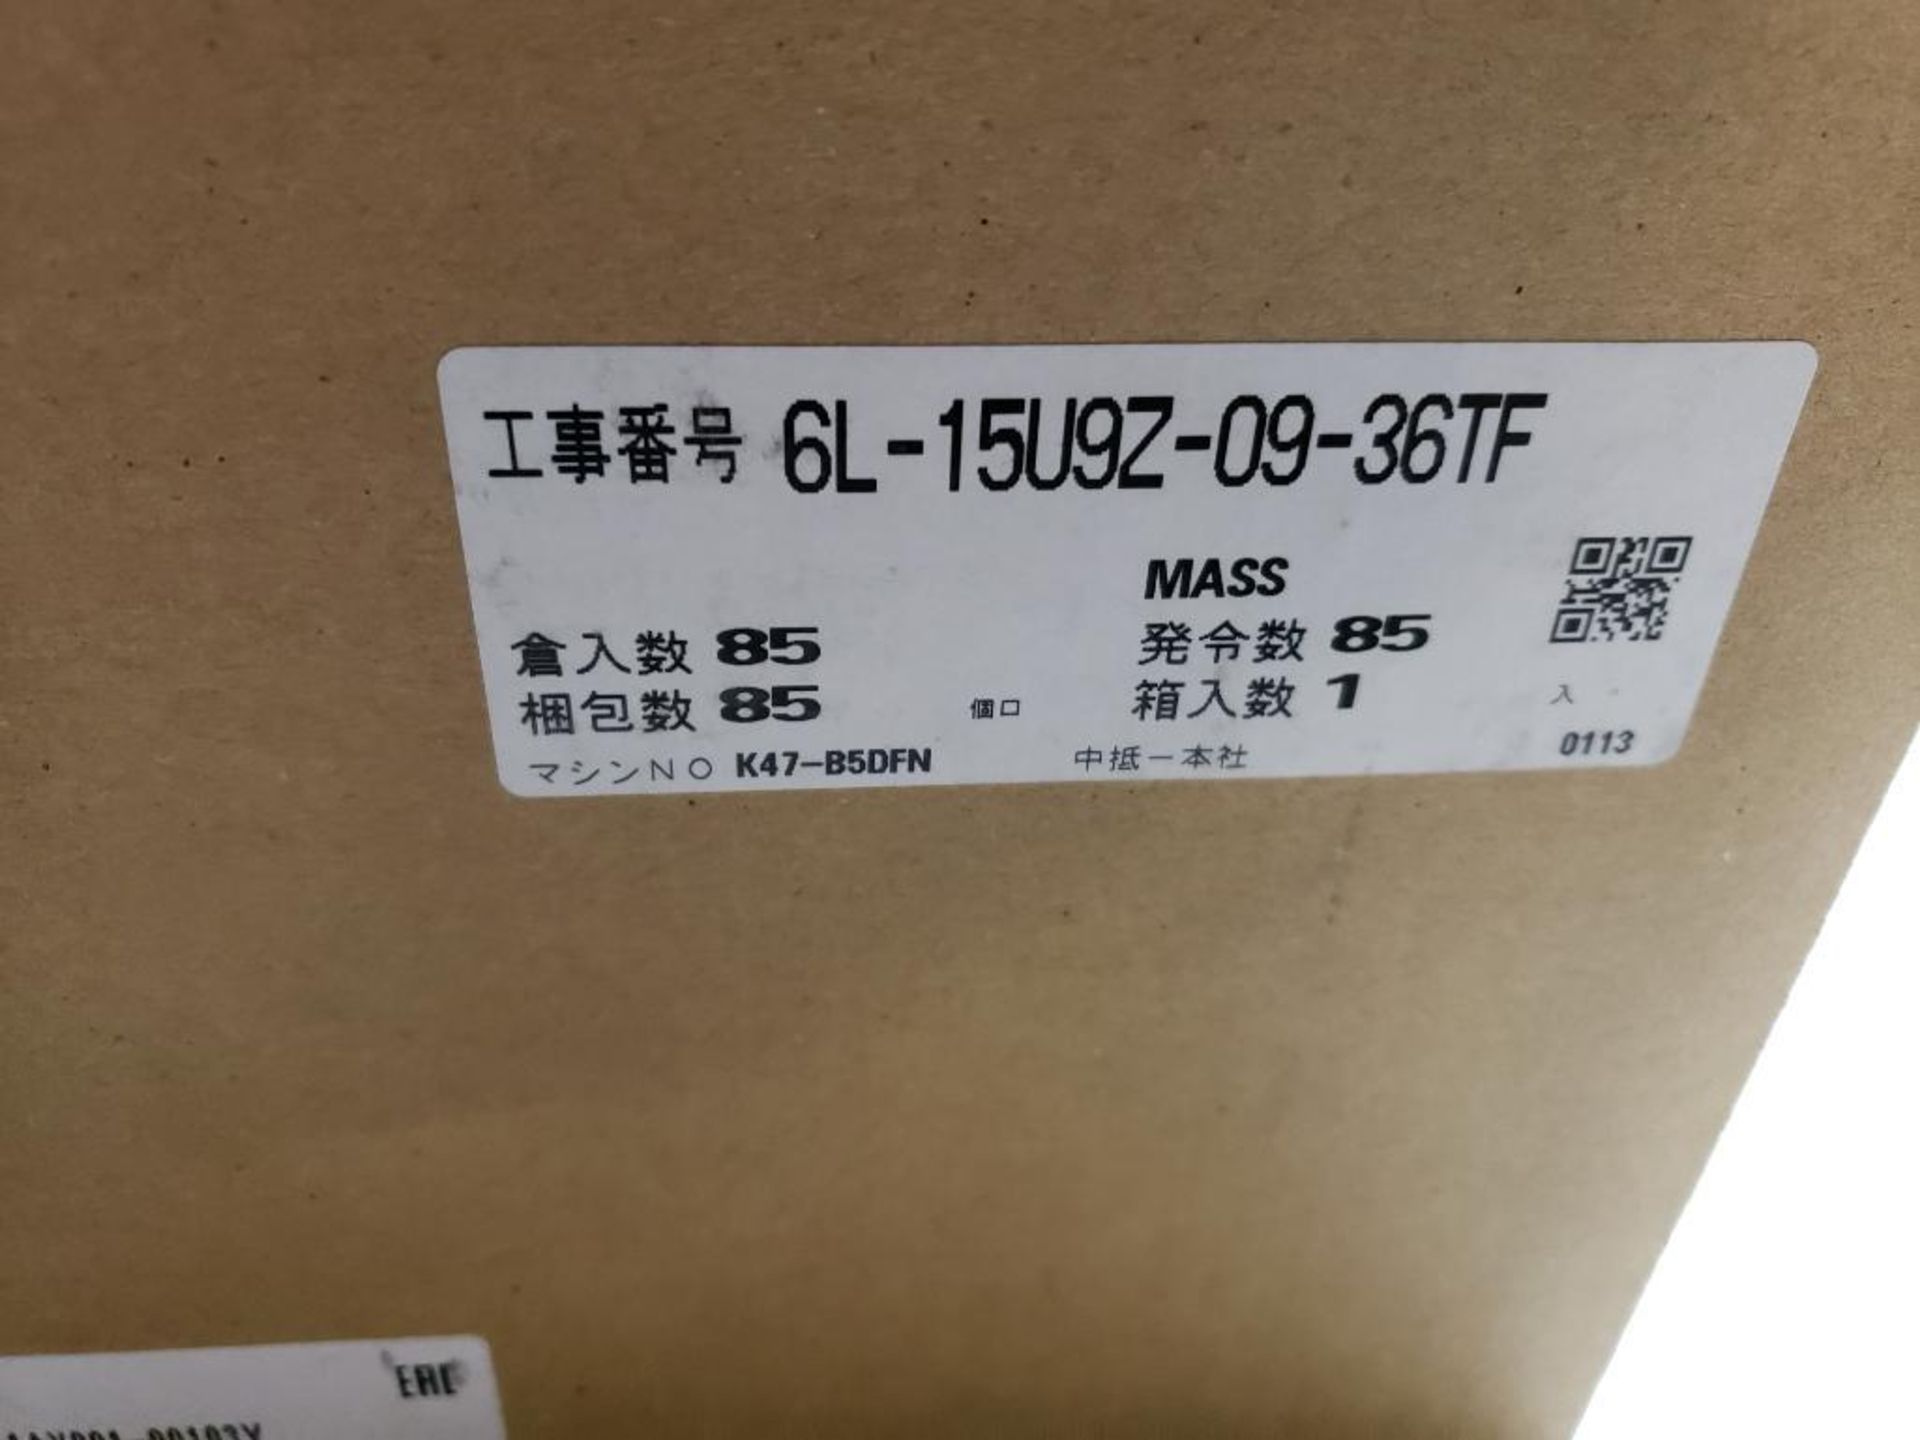 Mitsubishi inverter drive. Part number FR-D740-080-N7. New in box. - Image 4 of 5